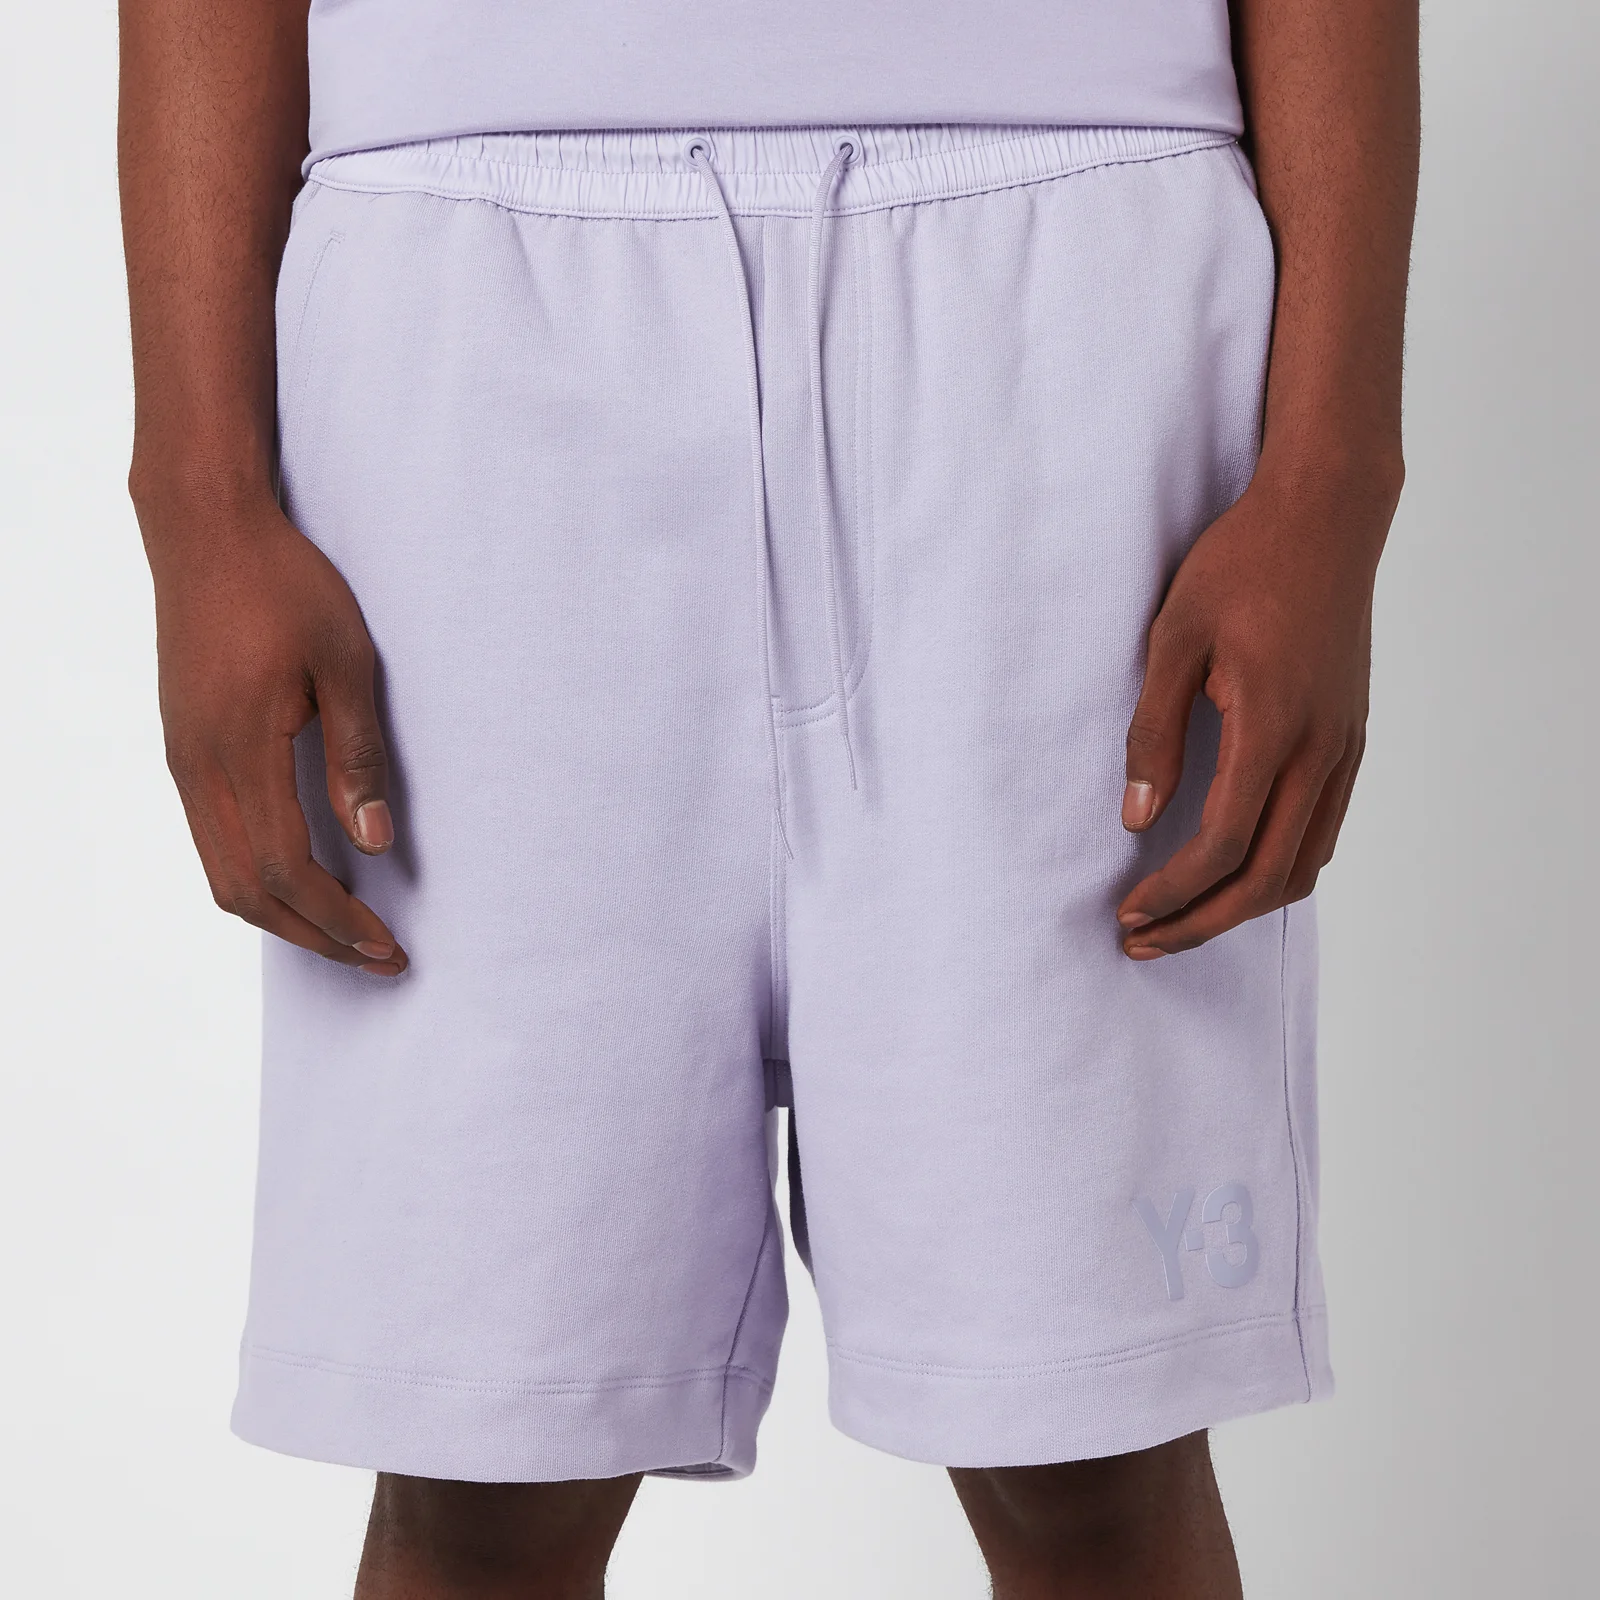 Y-3 Men's Classic Terry Shorts - Hope Image 1